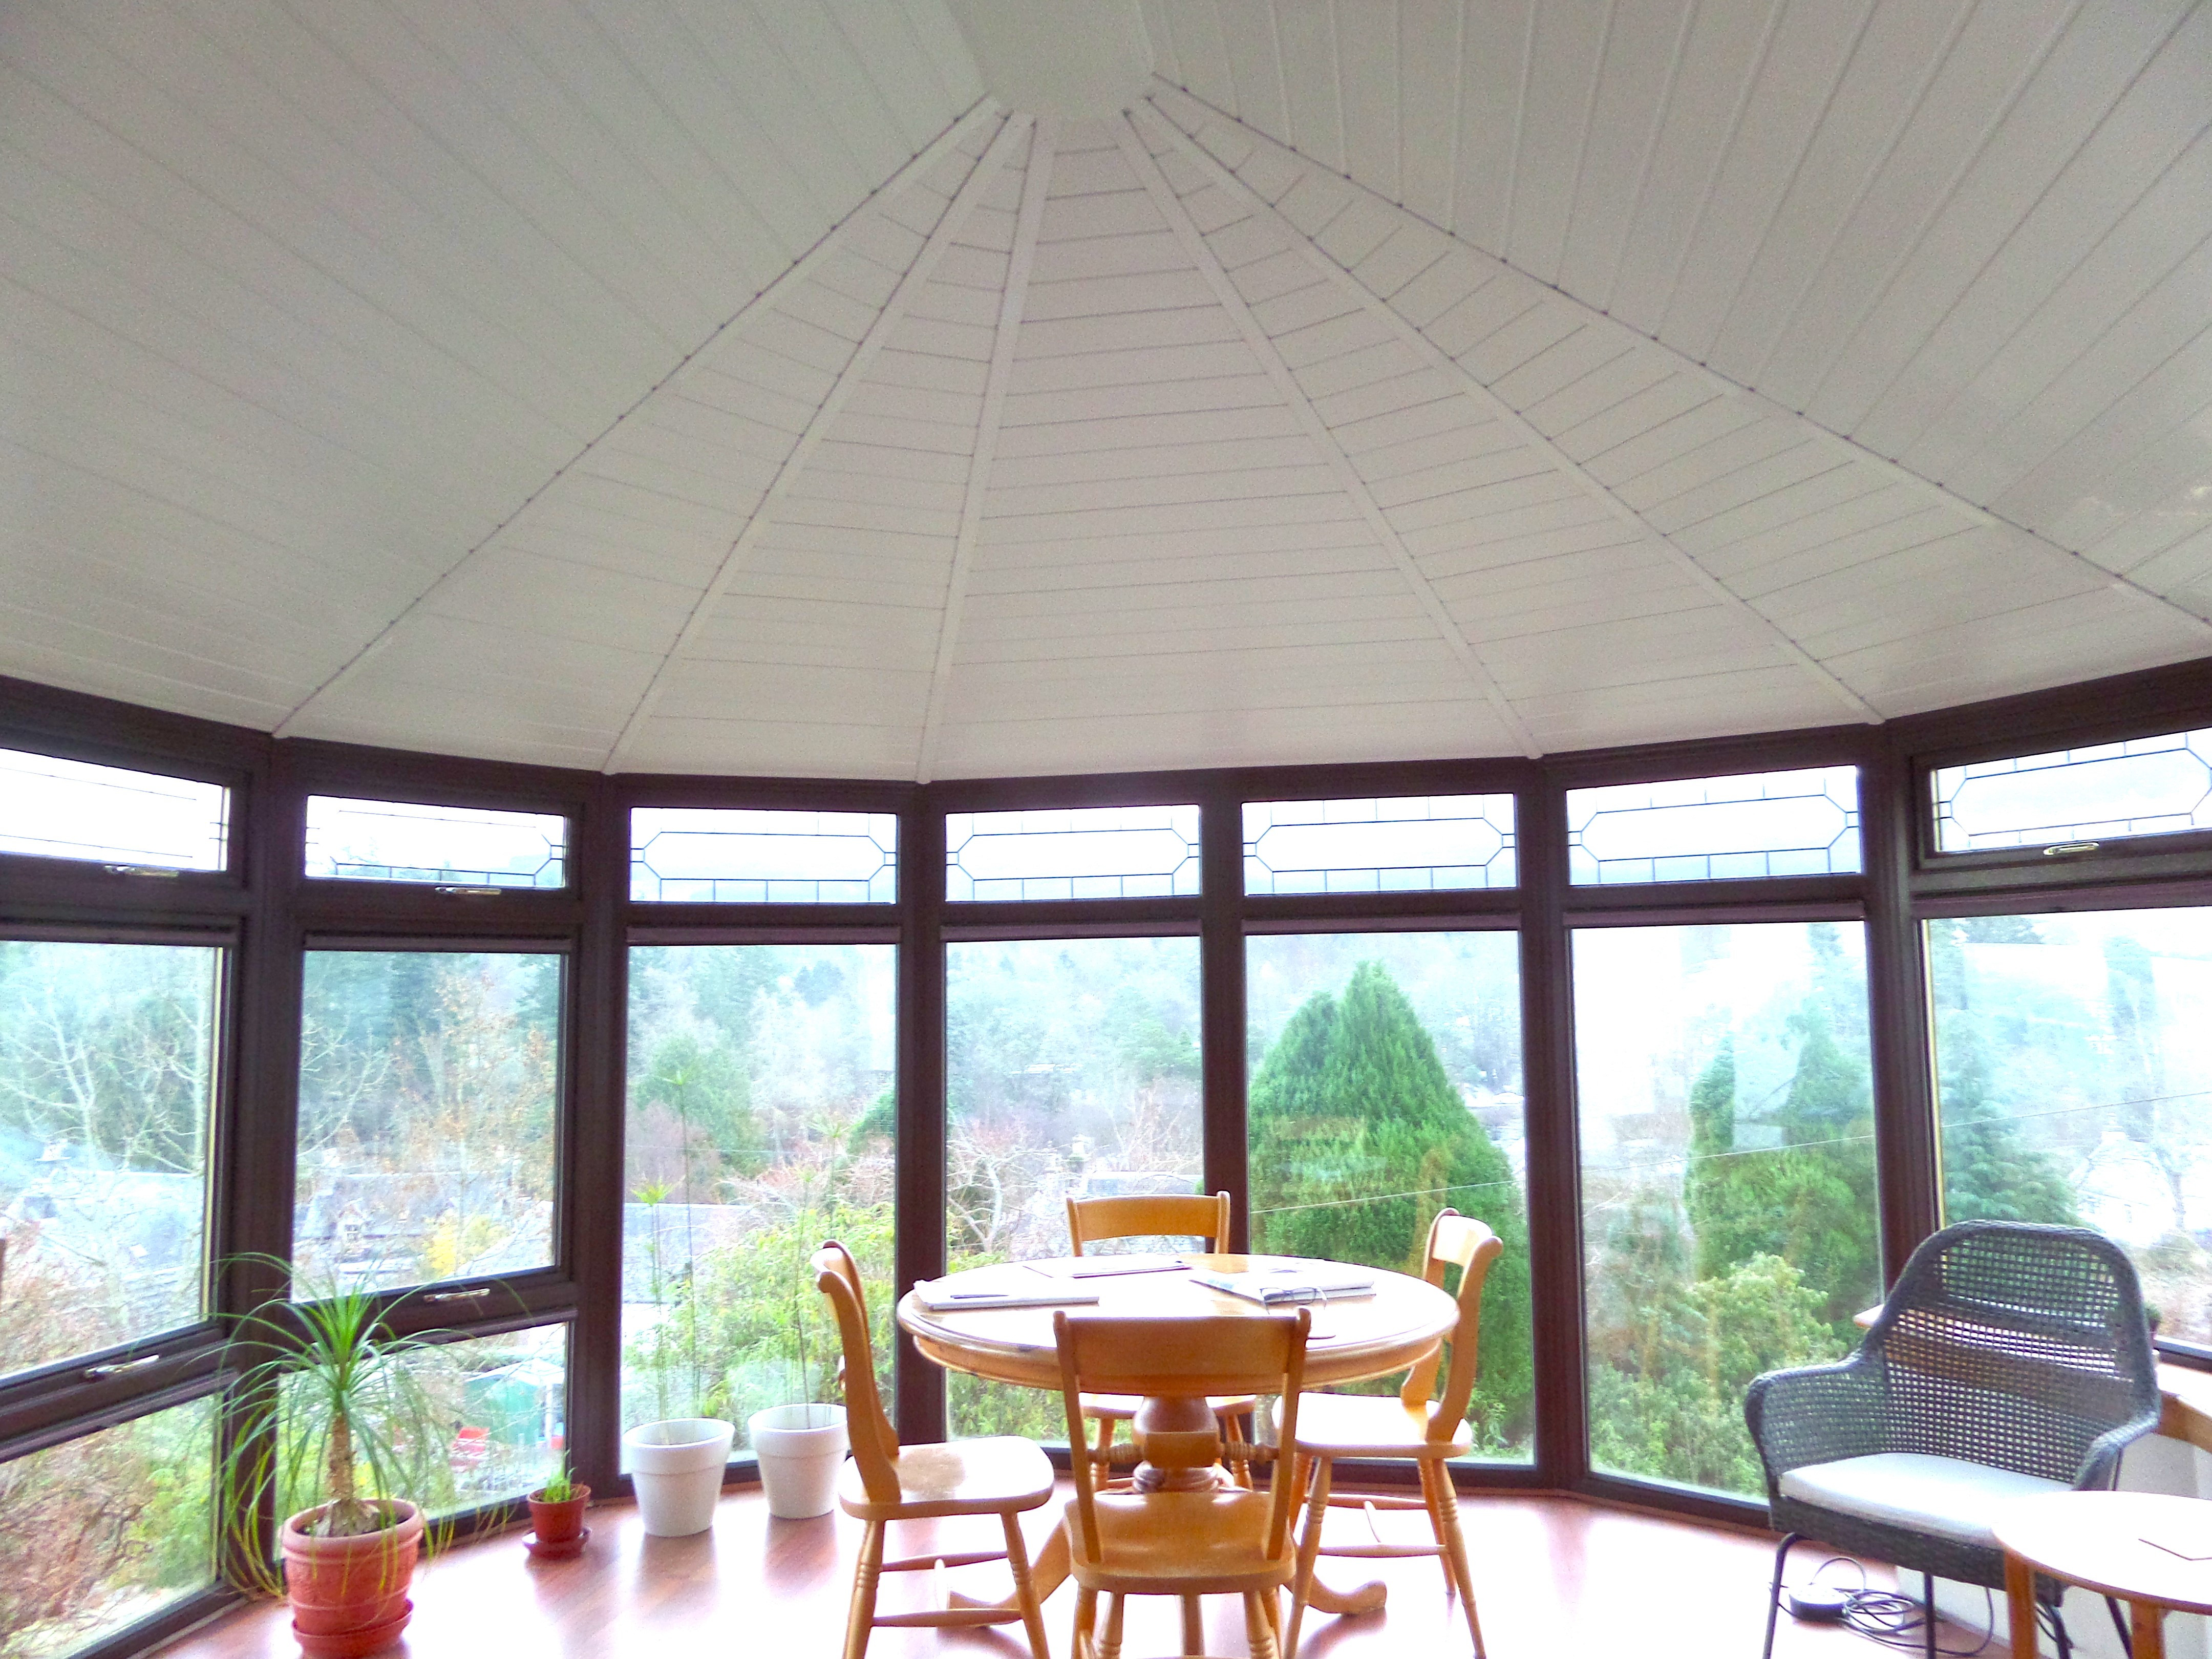 Completed Conservatory Roof Insulation Project